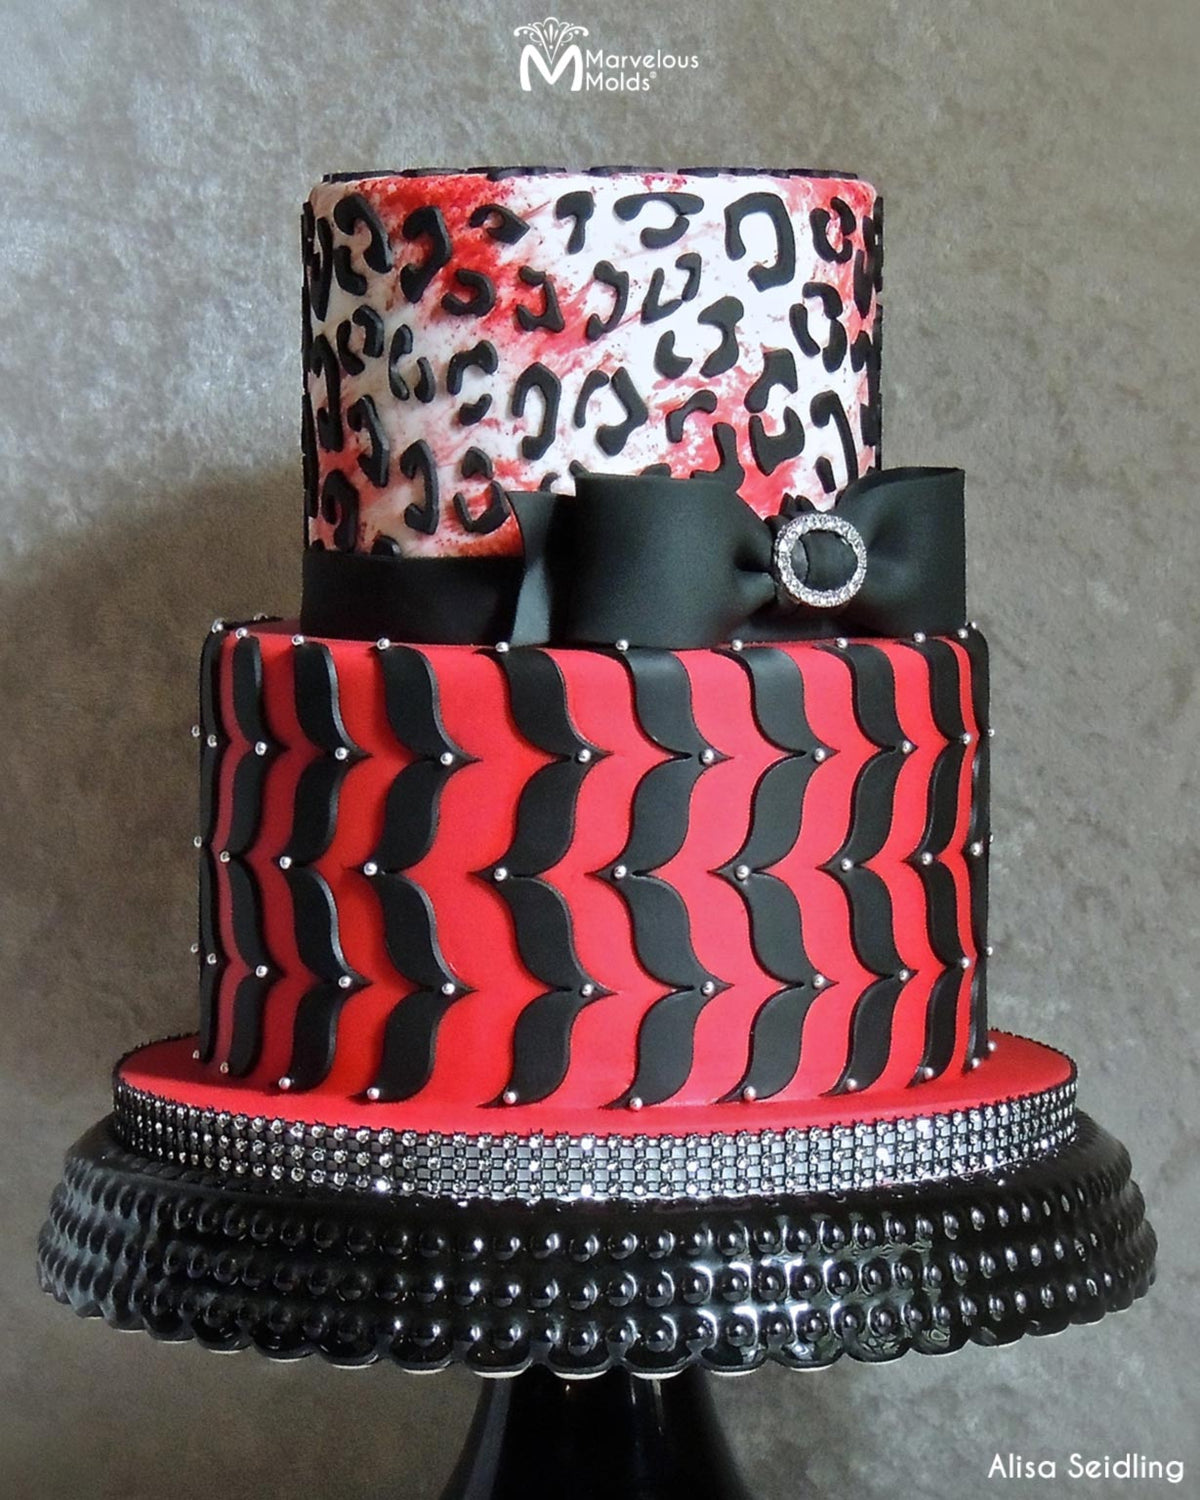 https://marvelousmolds.com/cdn/shop/products/striking-two-tier-leopard-print-decorated-cake-silicone-onlays-marvelous-molds_c6c92448-e23c-48ab-842a-20d282e4ef4b.jpg?v=1677275183&width=1200